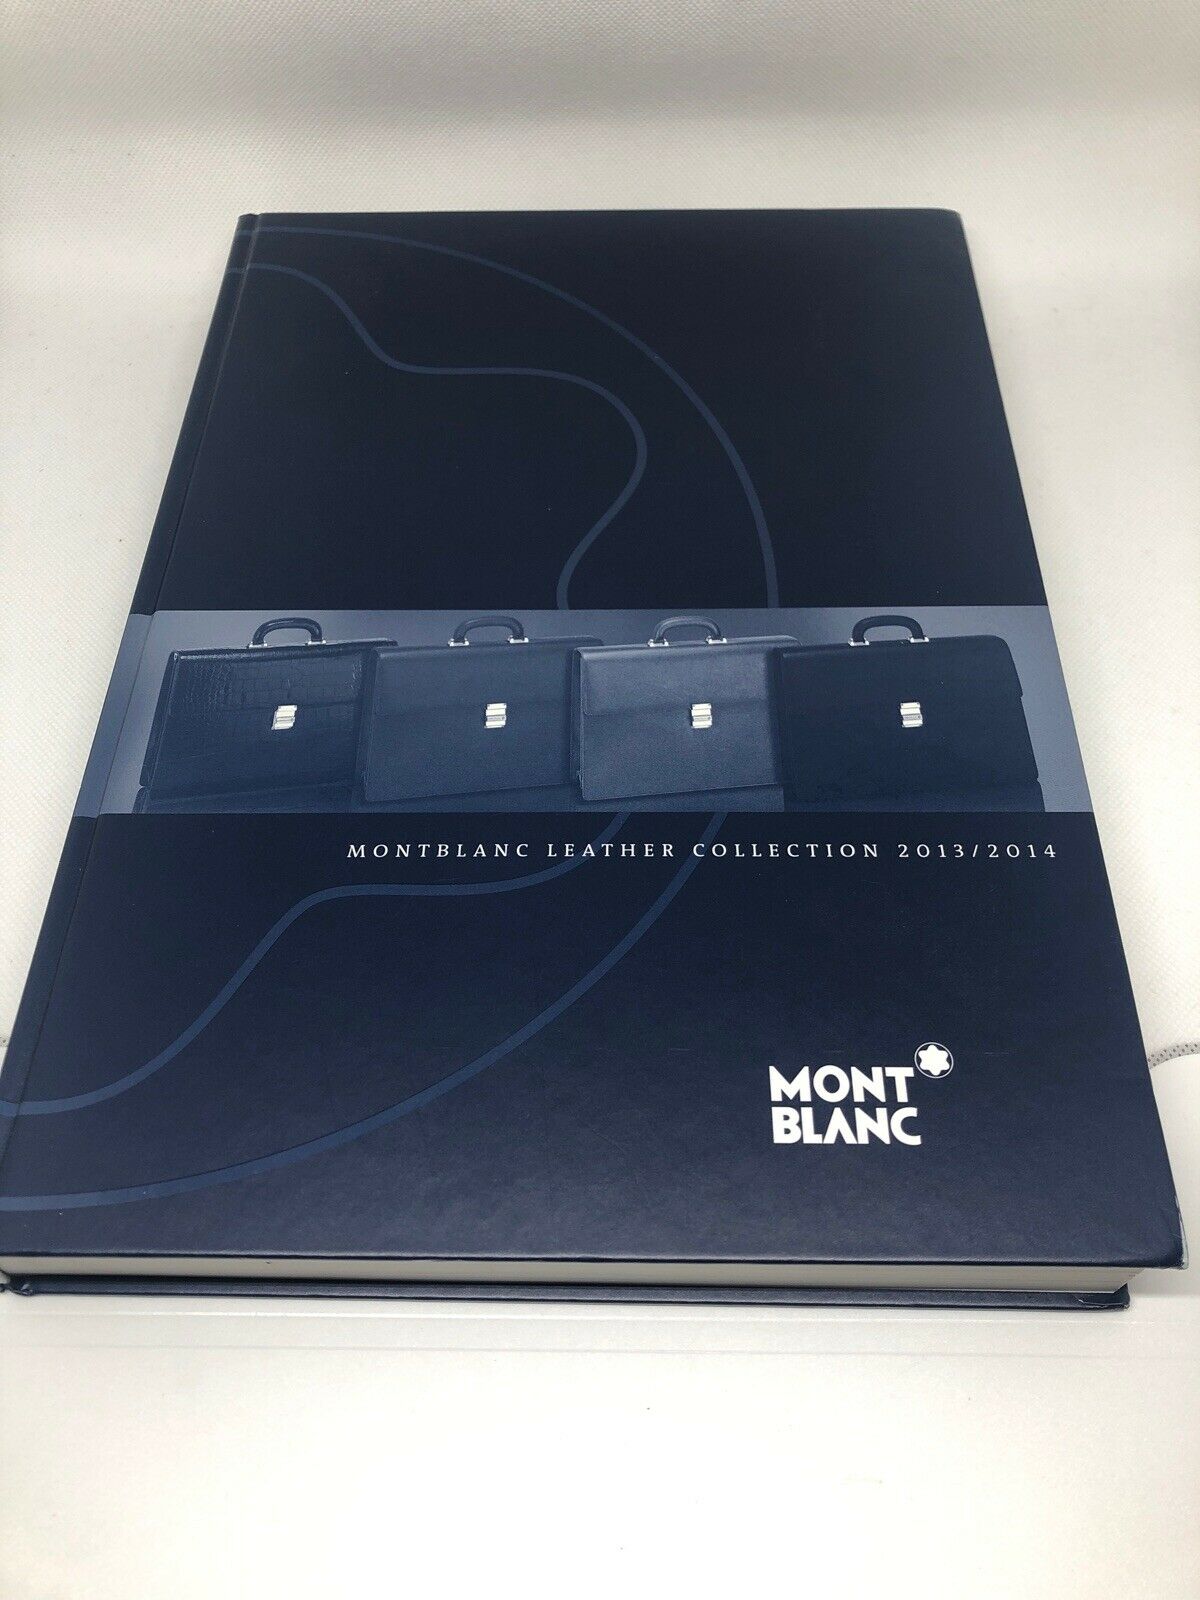 Montblanc Leather Book Hardcover Guide Catalog 2013 2014